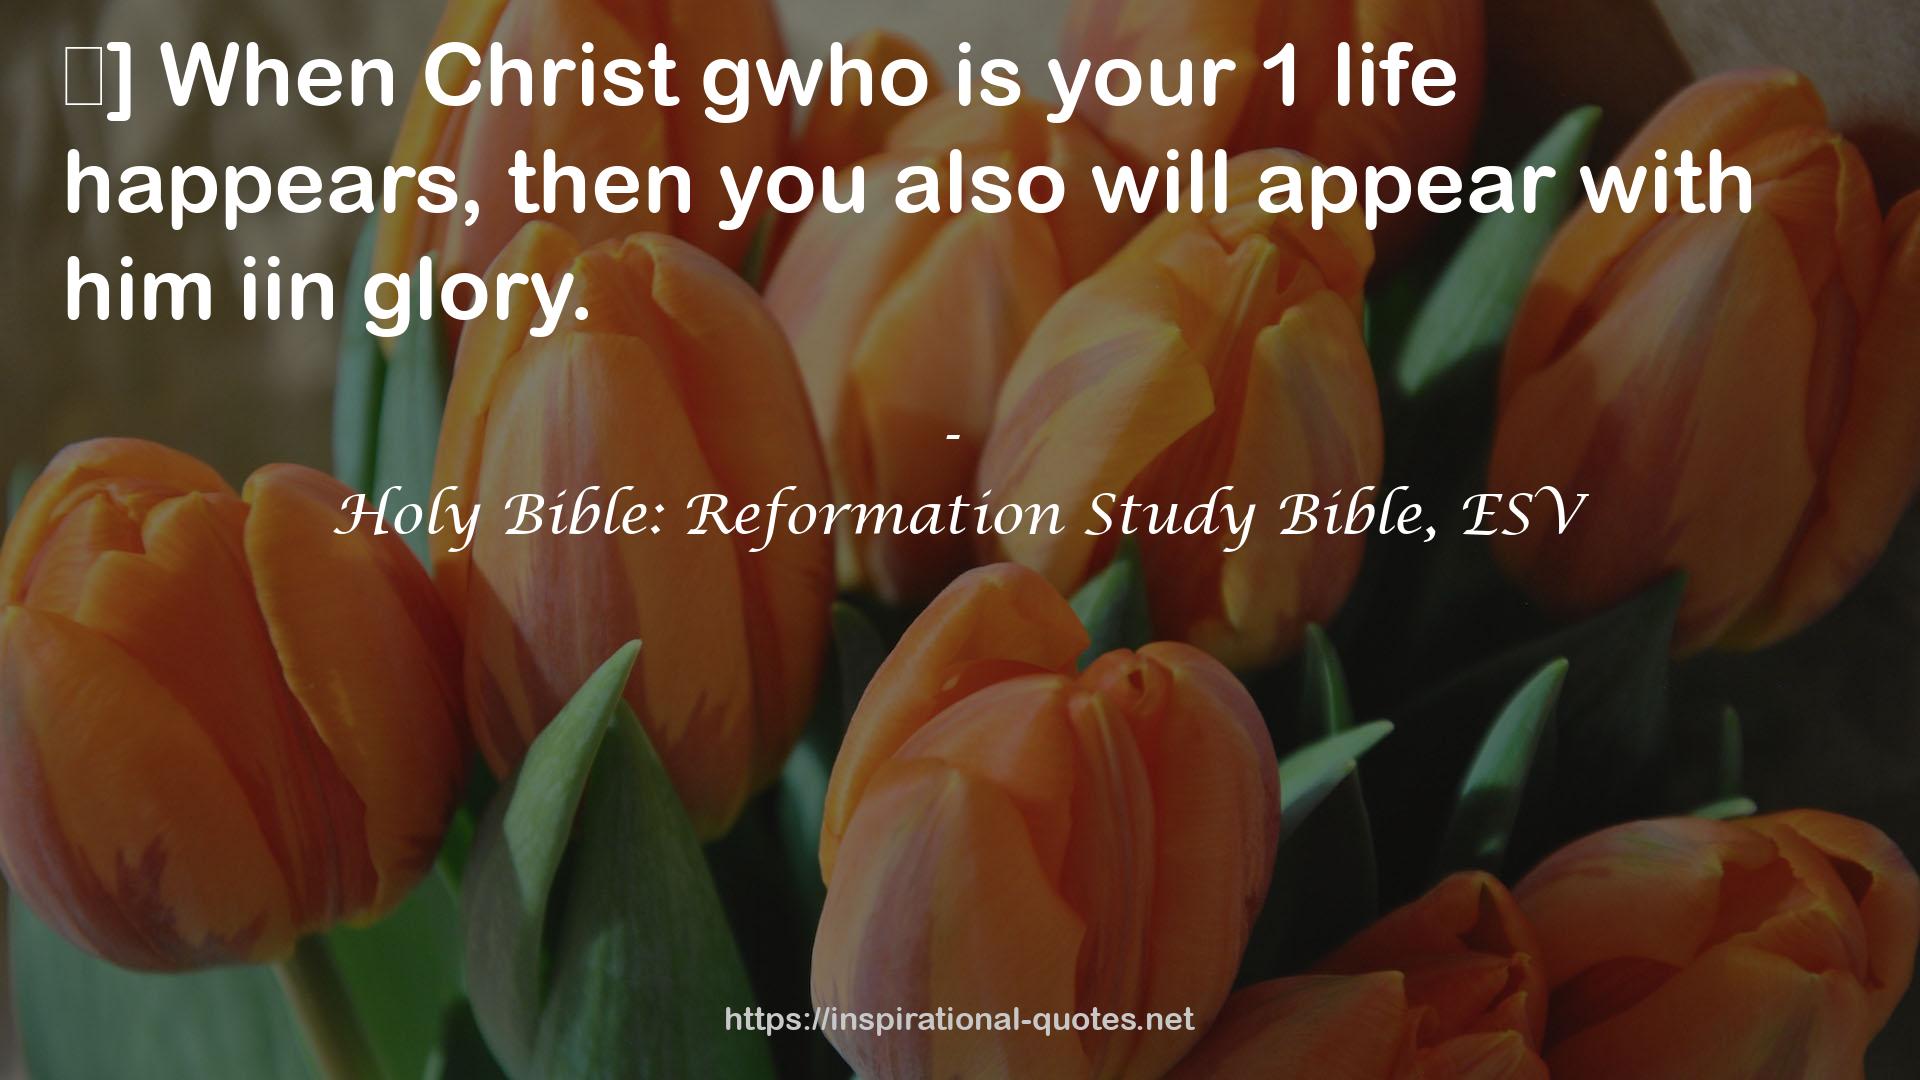 Holy Bible: Reformation Study Bible, ESV QUOTES